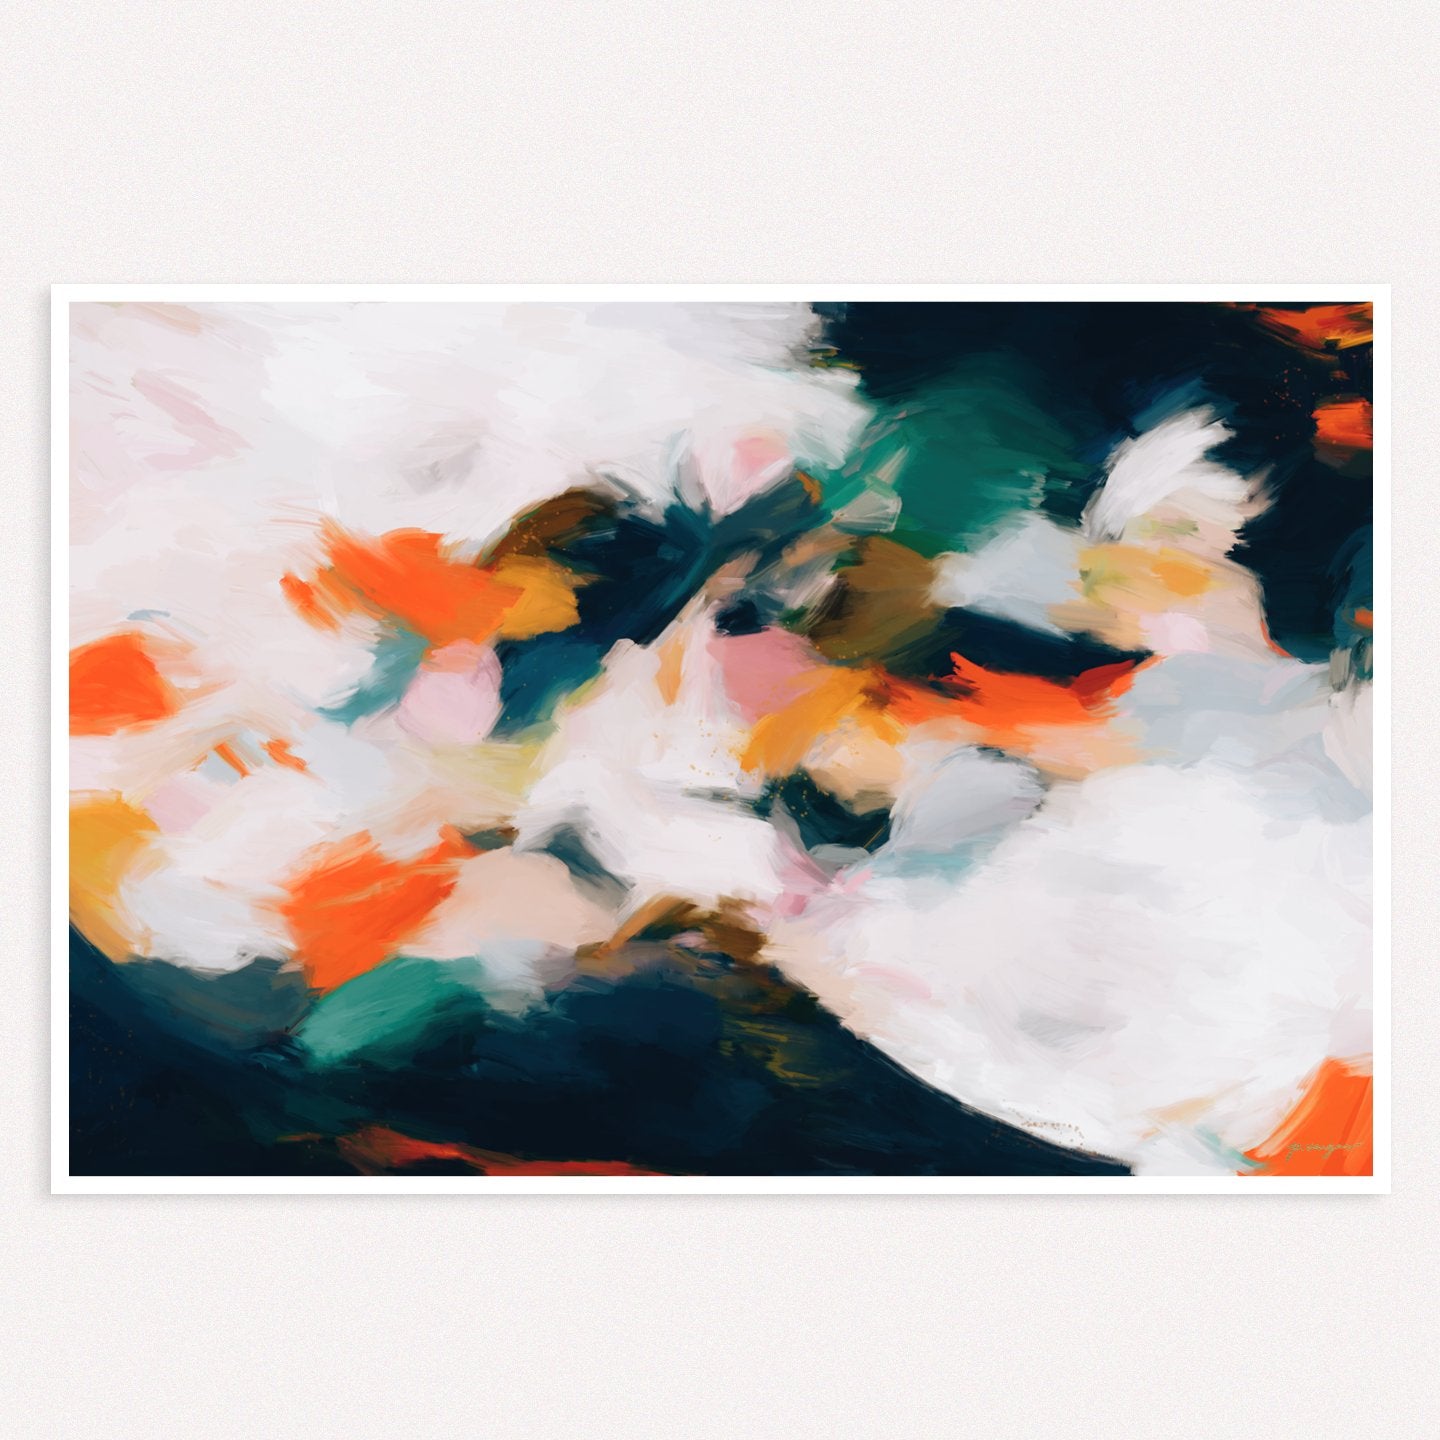 West, blue and orange colorful abstract wall art print by Parima Studio